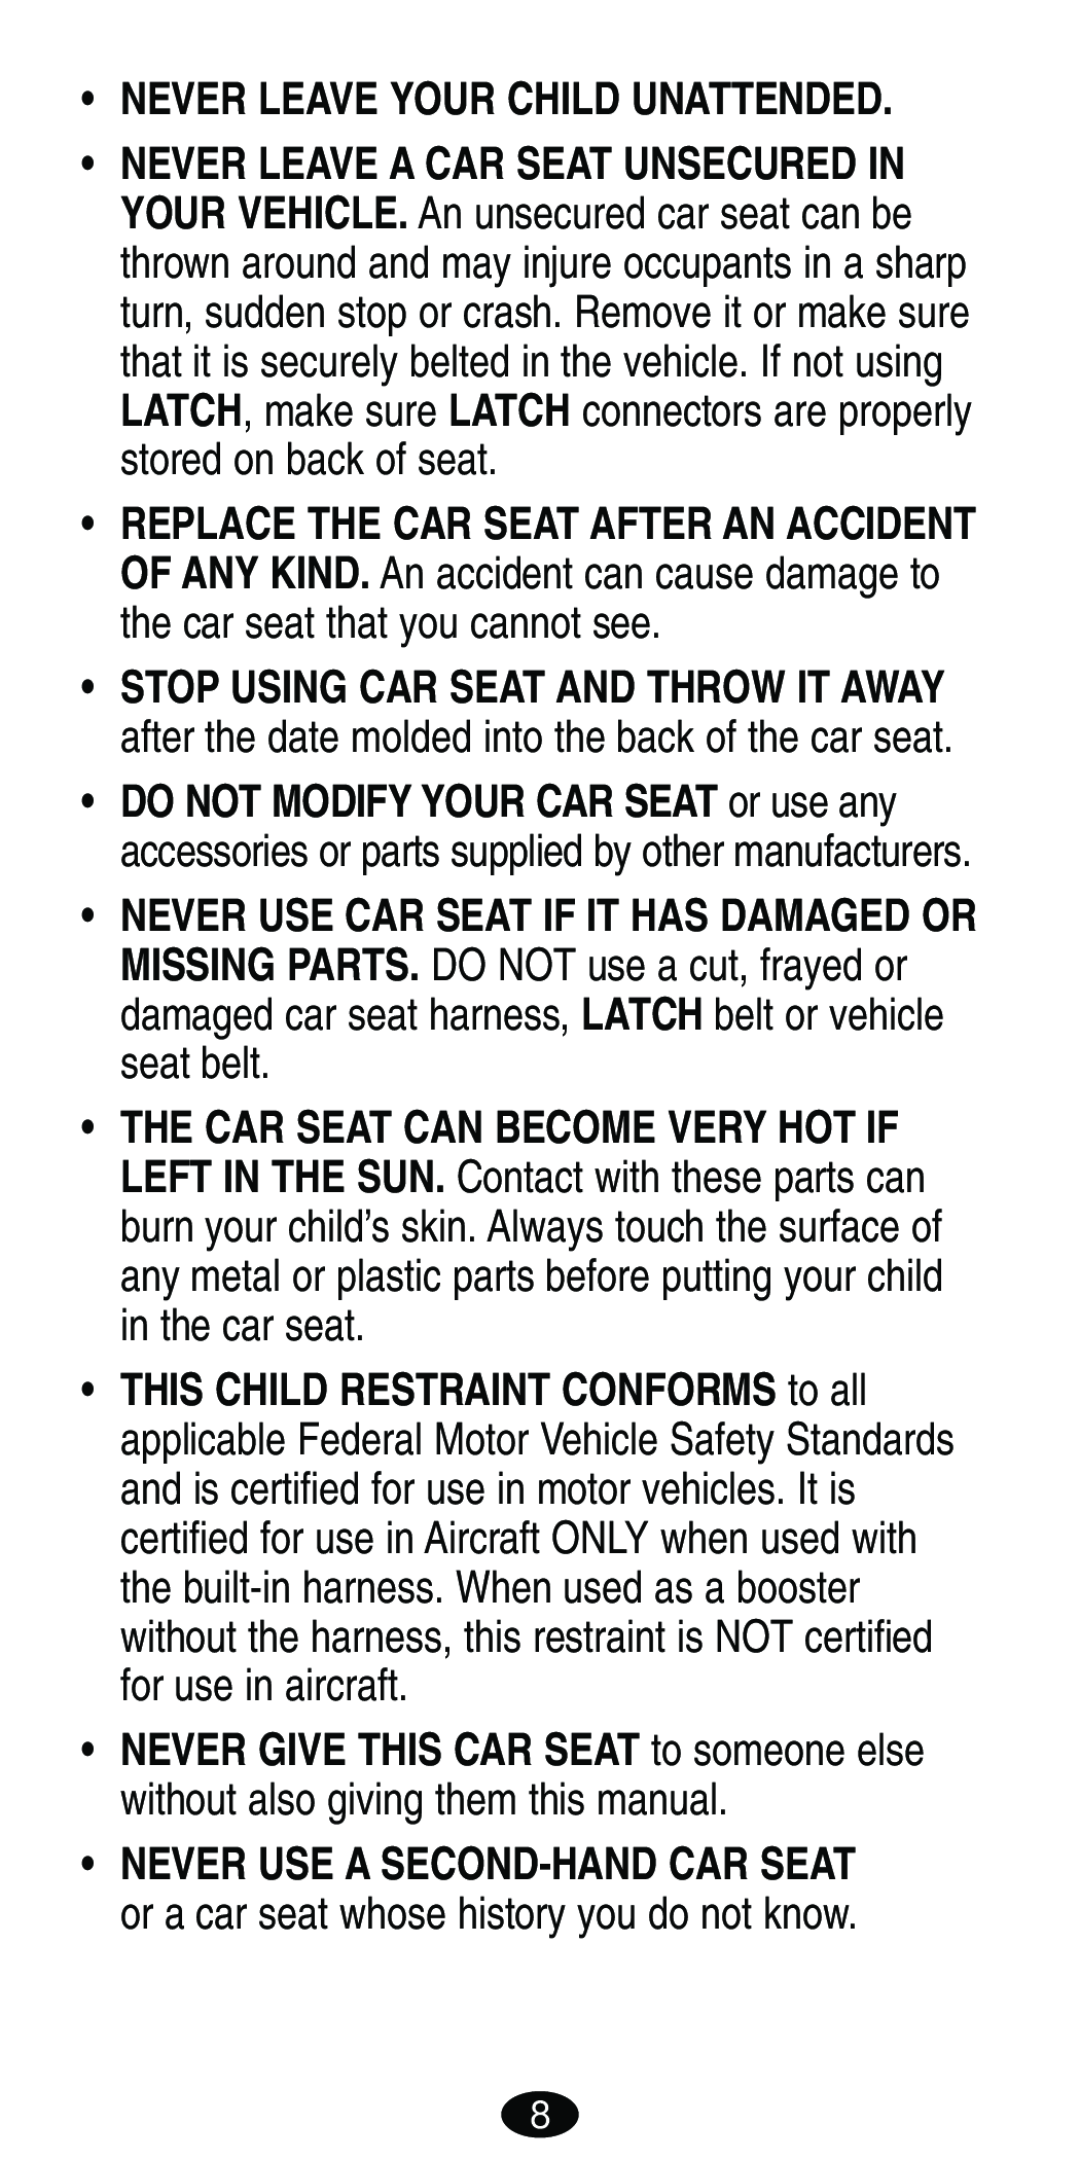 Graco Car Seat/Booster manual Never Leave Your Child Unattended 